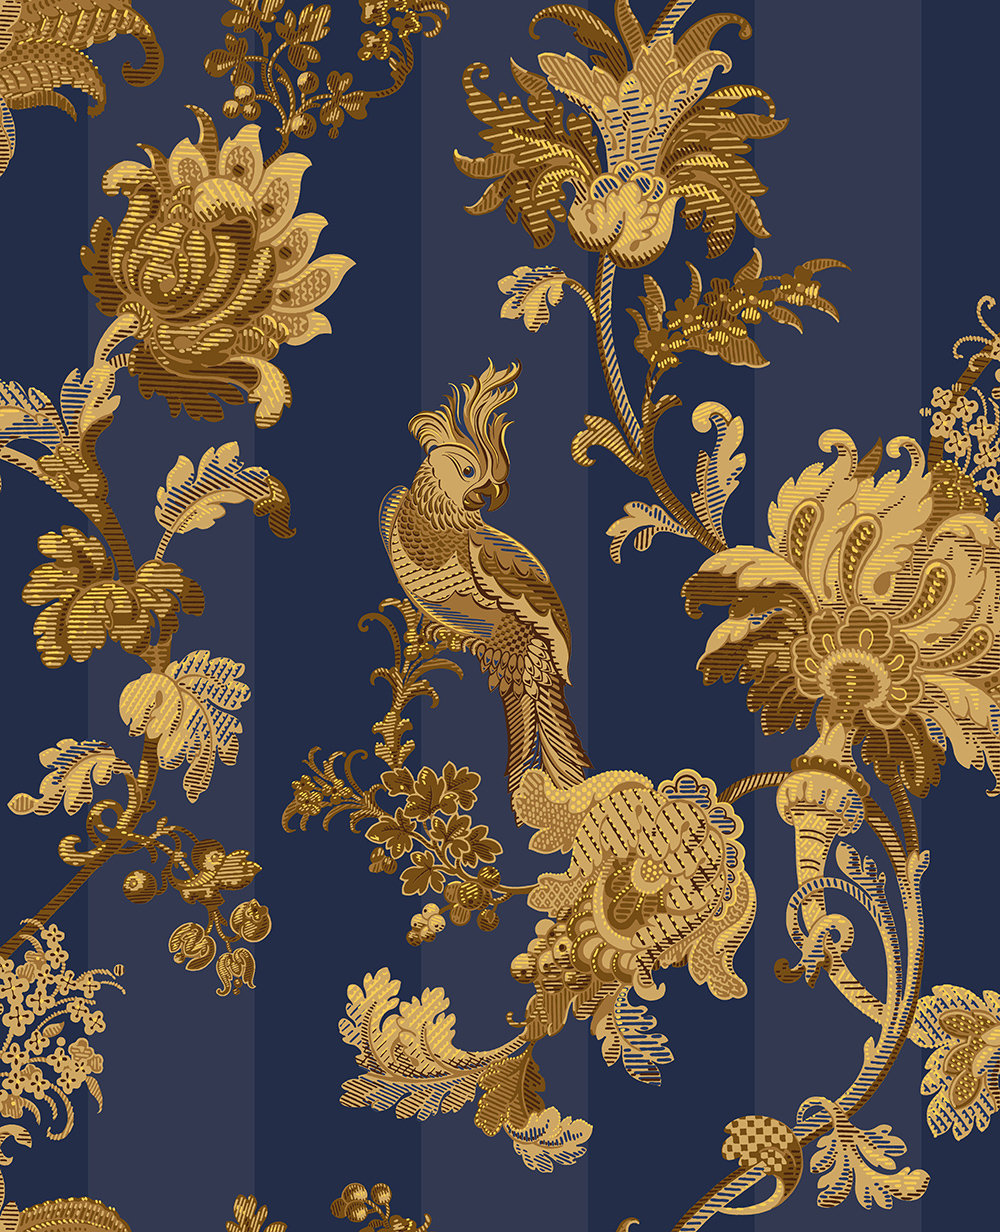 blue and gold wallpaper,pattern,textile,ornament,wallpaper,metal